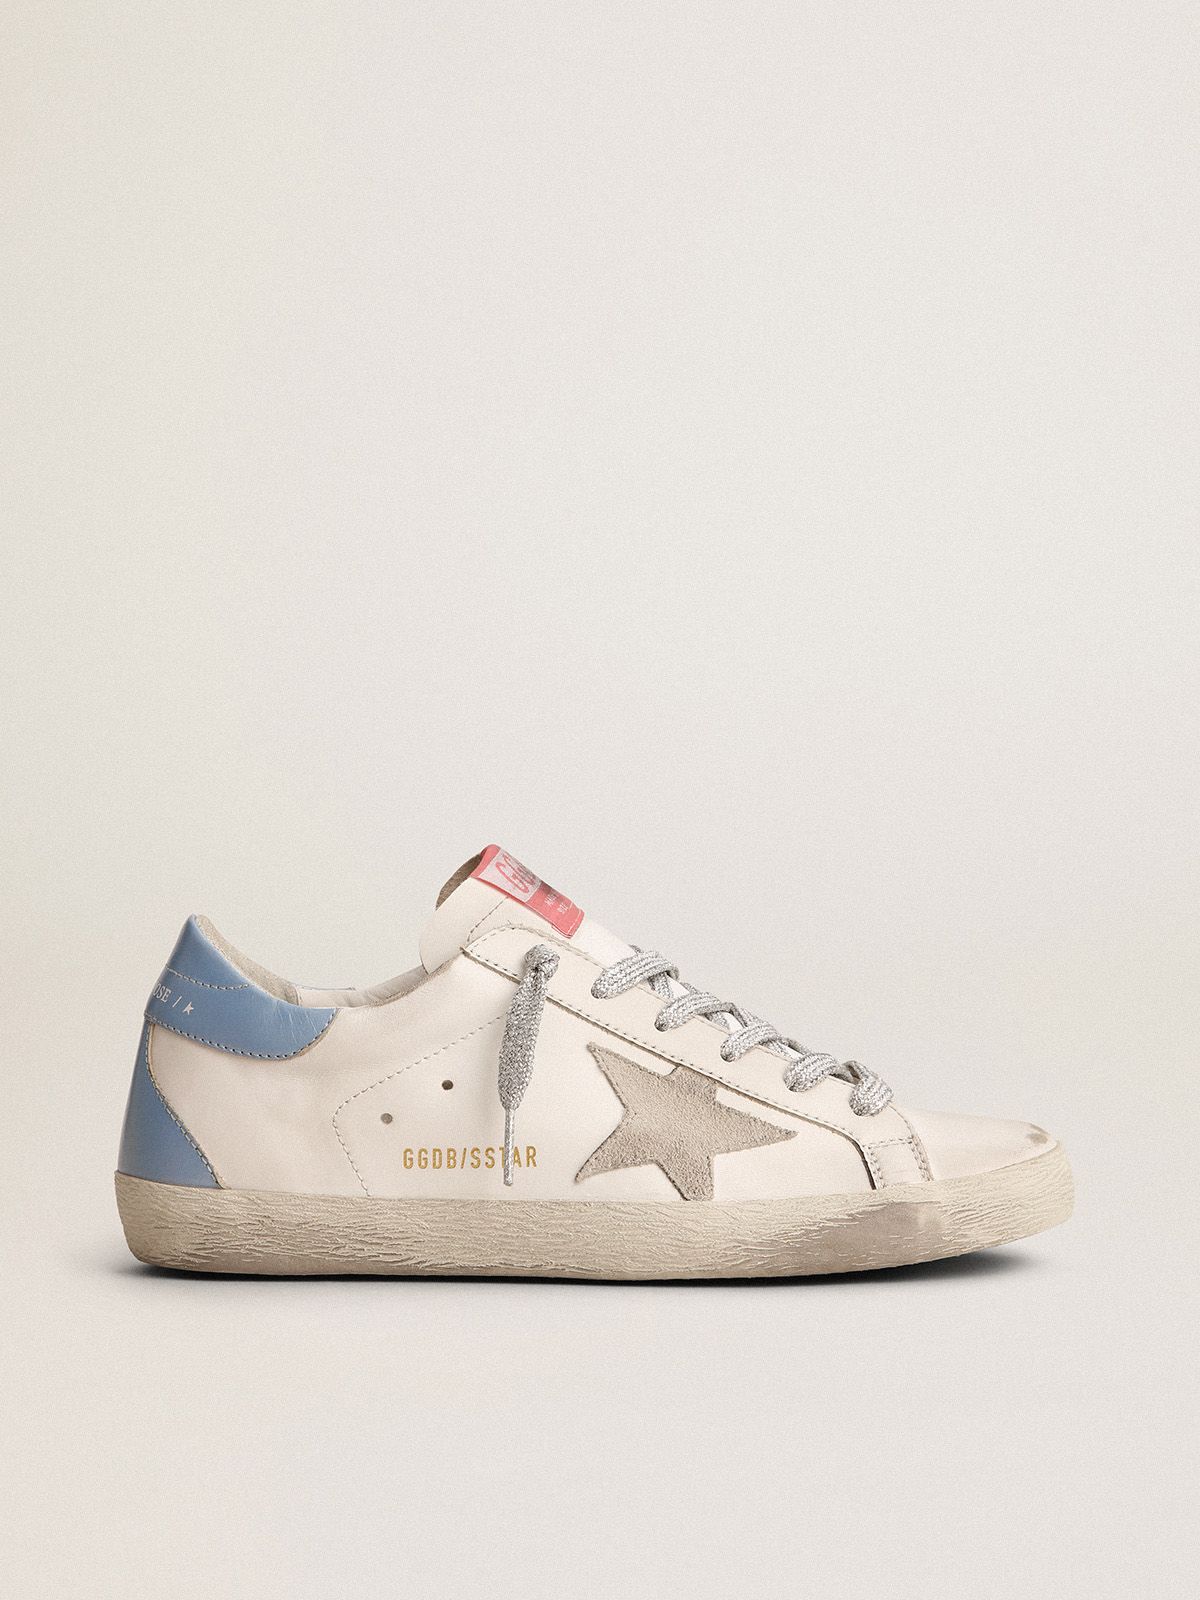 golden goose leather with suede Super-Star laminated sneakers tab star ice-gray sky-blue heel and